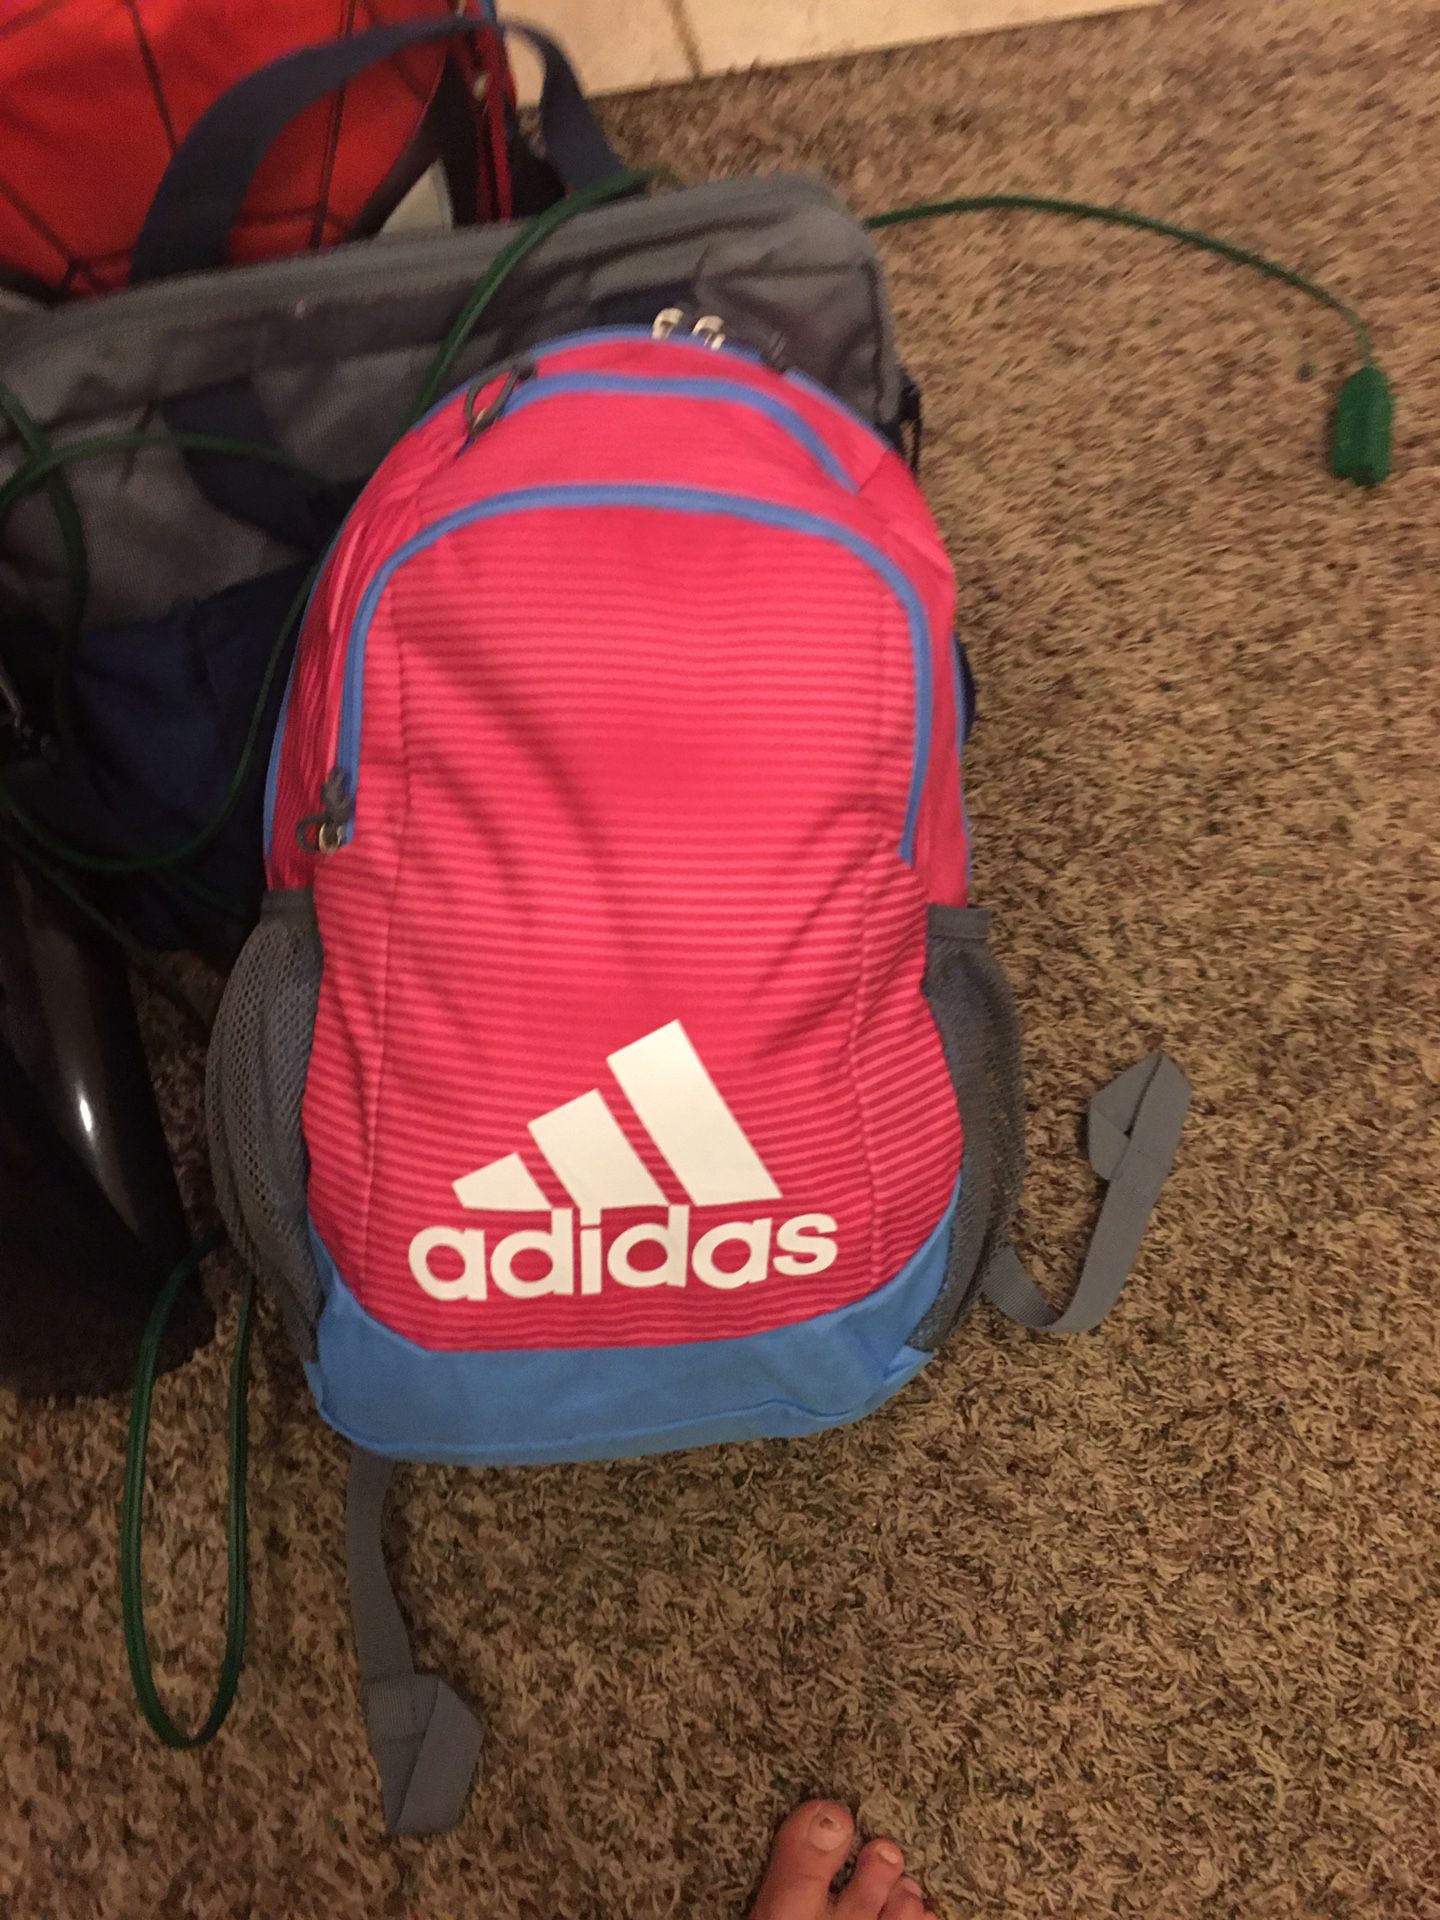 Adidas backpack in great condition